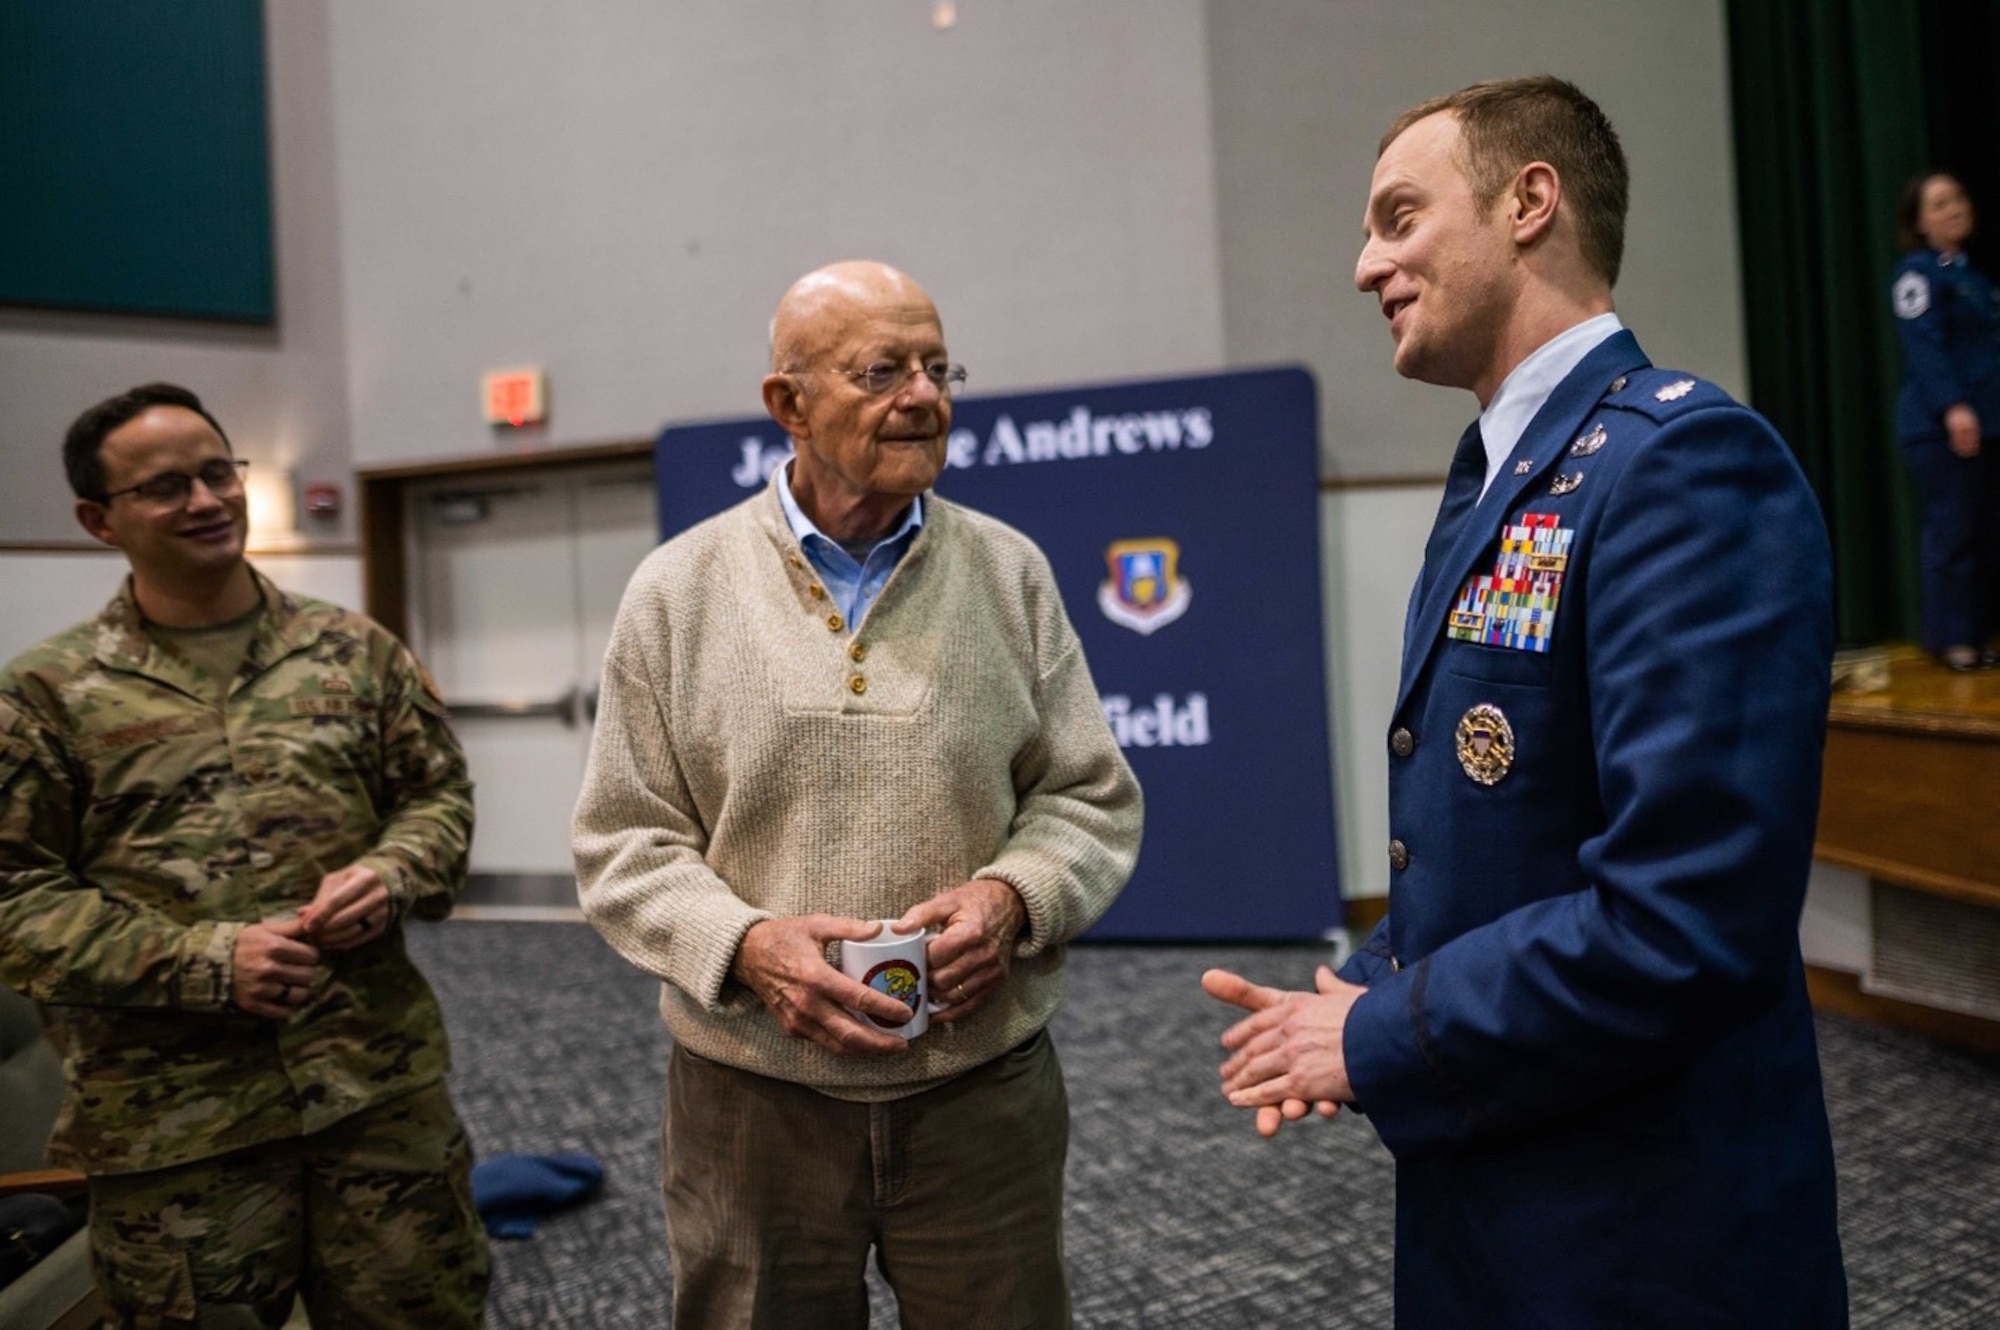 Master Sgt. Patrick George, 16th Intelligence Squadron first sergeant (left), and Lt. Col. Philip Caruso, 16 IS director of operations (right) talk with Lt. Gen. (ret.) James Clapper, former director of national intelligence, after he shared his career experiences during a speaking event with the men and women of the 16th and 512th Intelligence Squadrons.